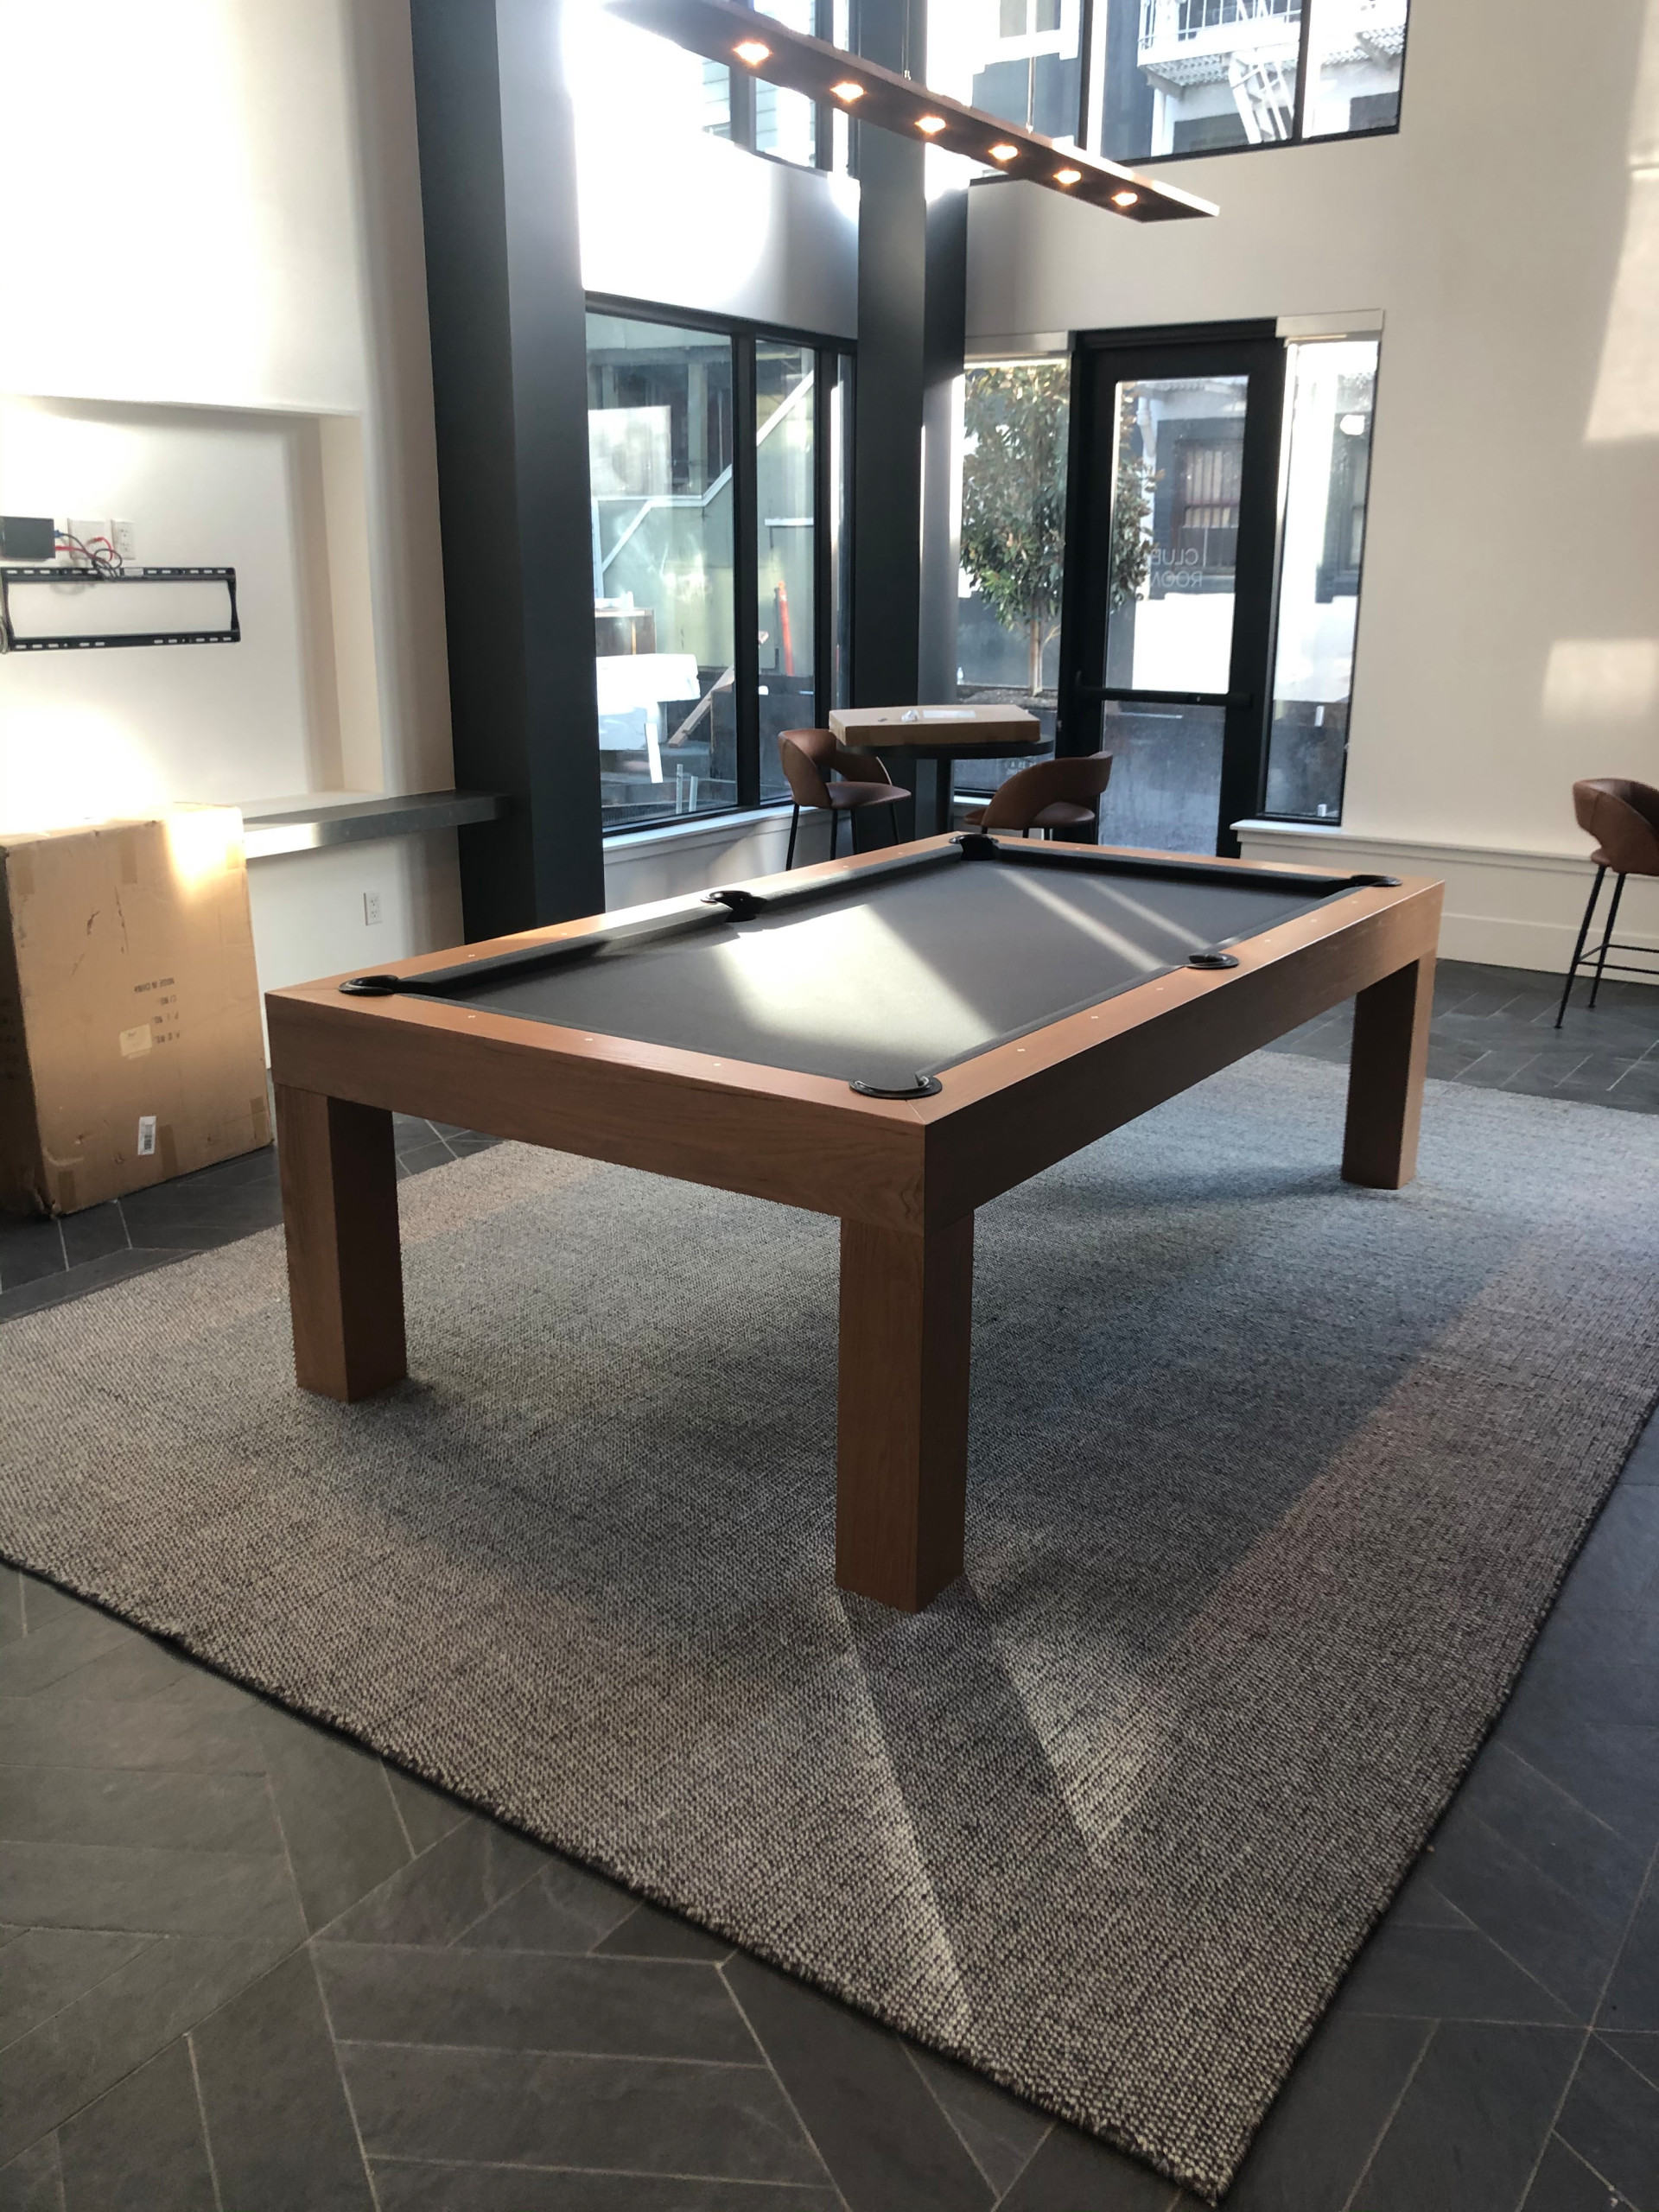 Modern pool table for a game room in an upscale apartment complex